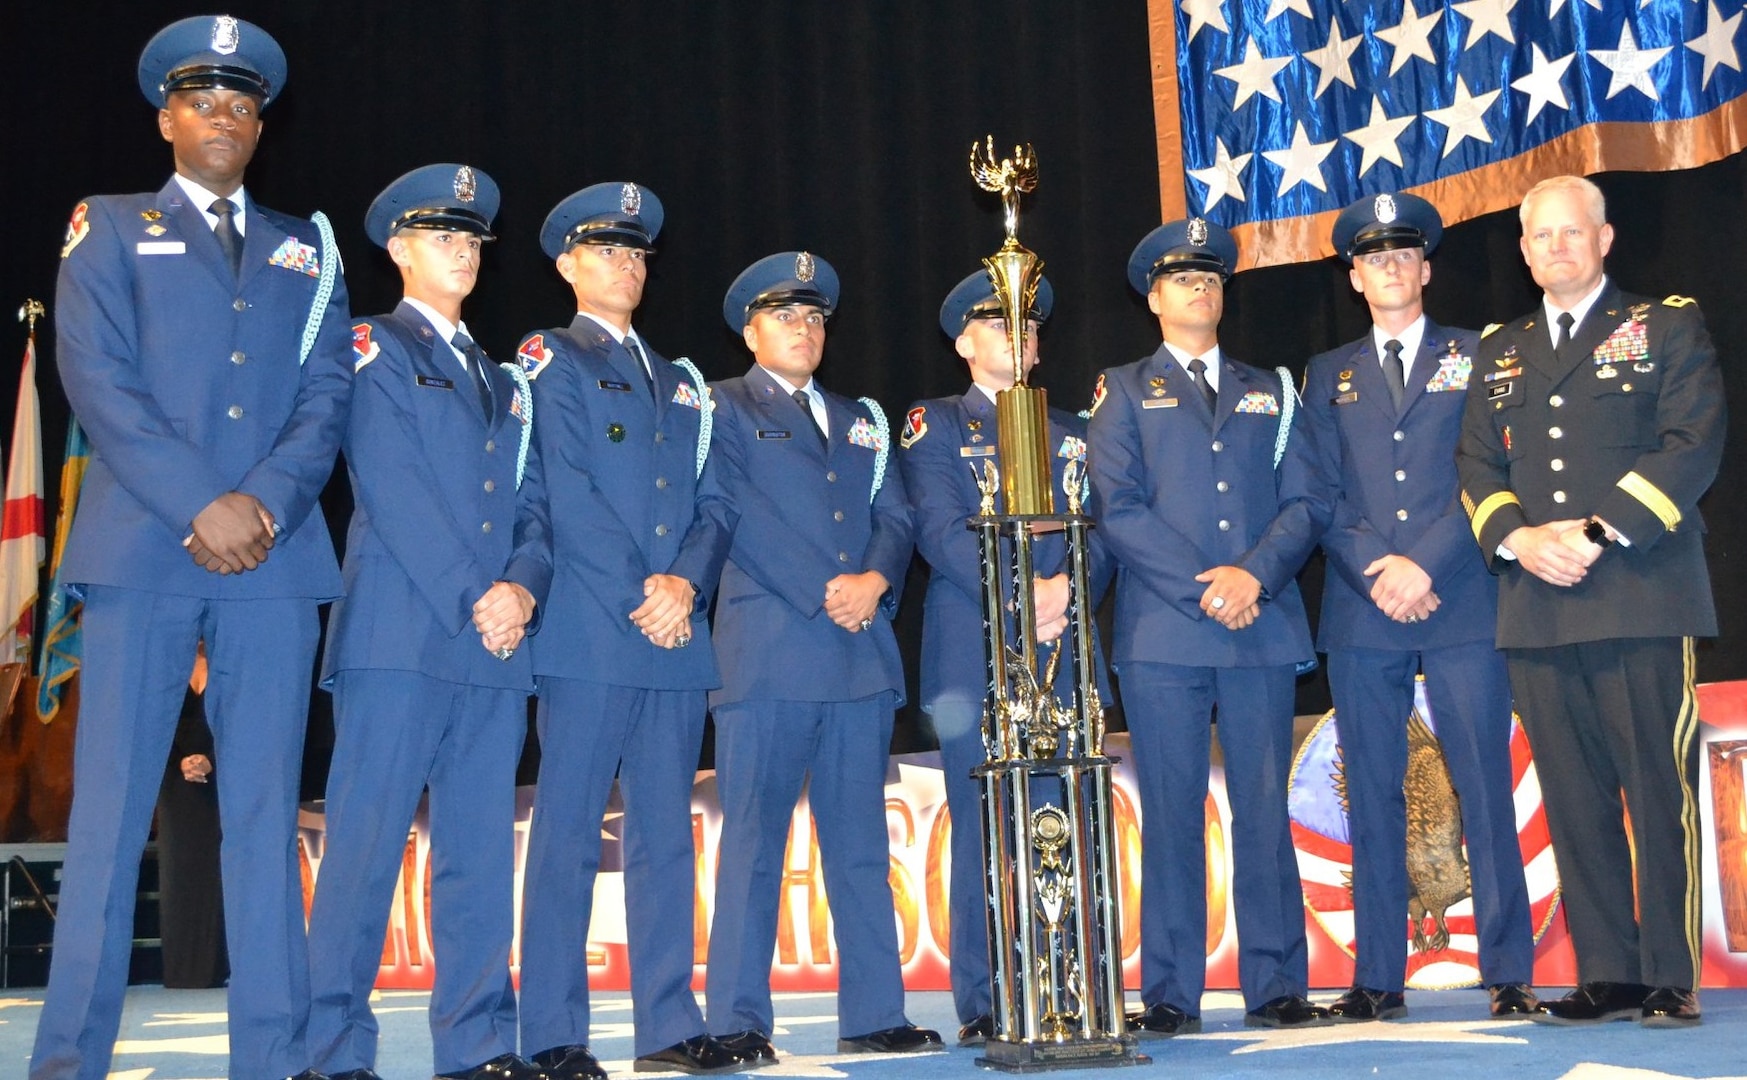 The John Jay Silver Eagles from Jay High School in San Antonio stand together after winning their fourth national title in five years at the National High School Drill Team Competition, May 3-5, 2019, at Daytona Beach, Florida. The competition was a three-day event where 68 Junior Reserve Officer Training Corps drill teams from all services compete against one another for titles in more than 50 events. U.S. Army Maj. Gen. John R. Evans Jr. (right), Army Cadet Command commander, presented the Silver Eagles’ trophy during the award ceremony. In total, John Jay High School took home 22 trophies from the competition.